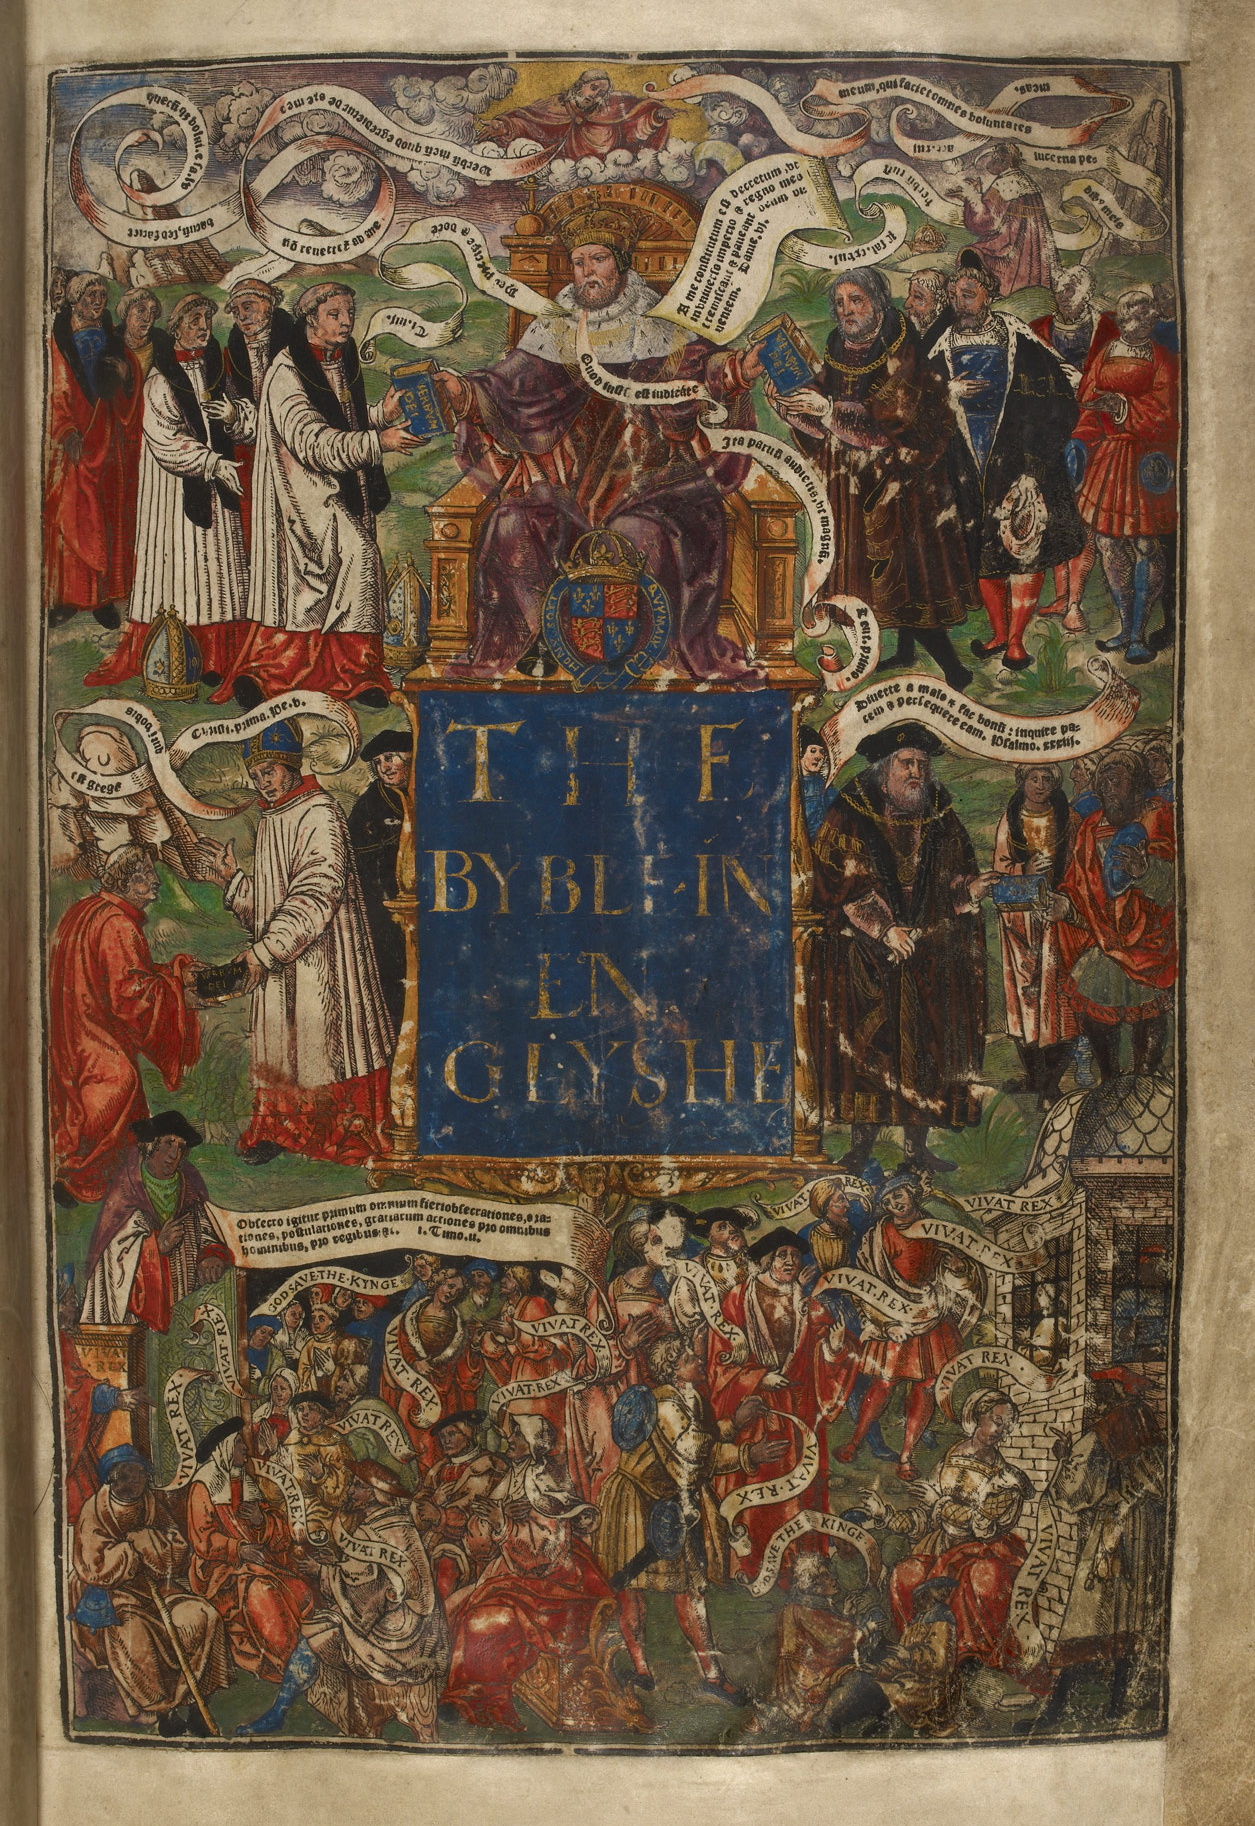 The Great Bible, probably Henry VIII's own copy, British Library